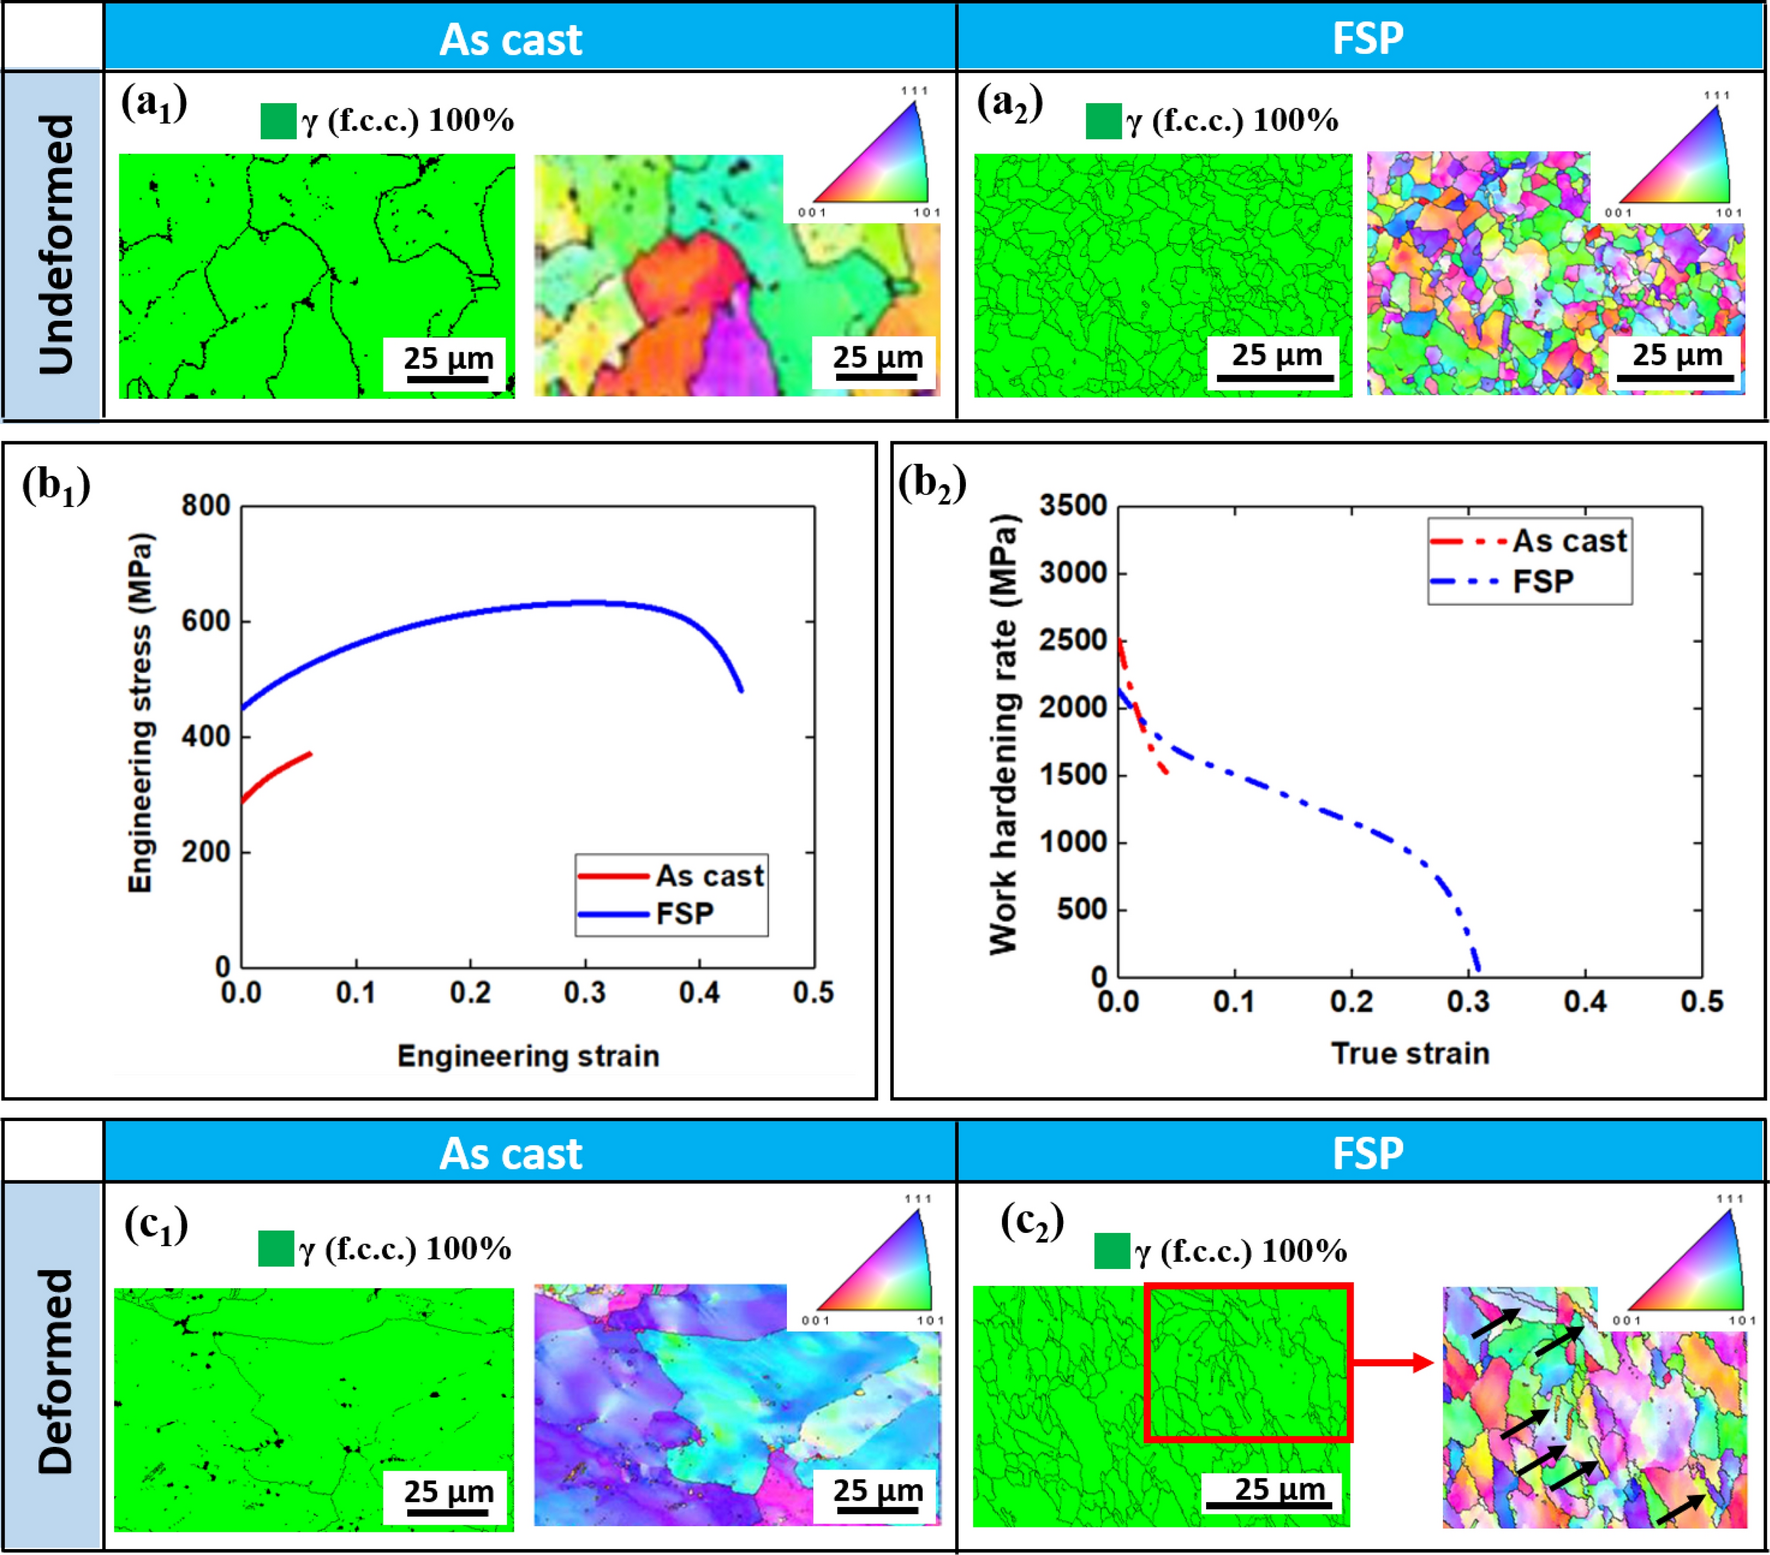 Co Introduction Of Precipitate Hardening And Trip In A Twip High Entropy Alloy Using Friction Stir Alloying Scientific Reports